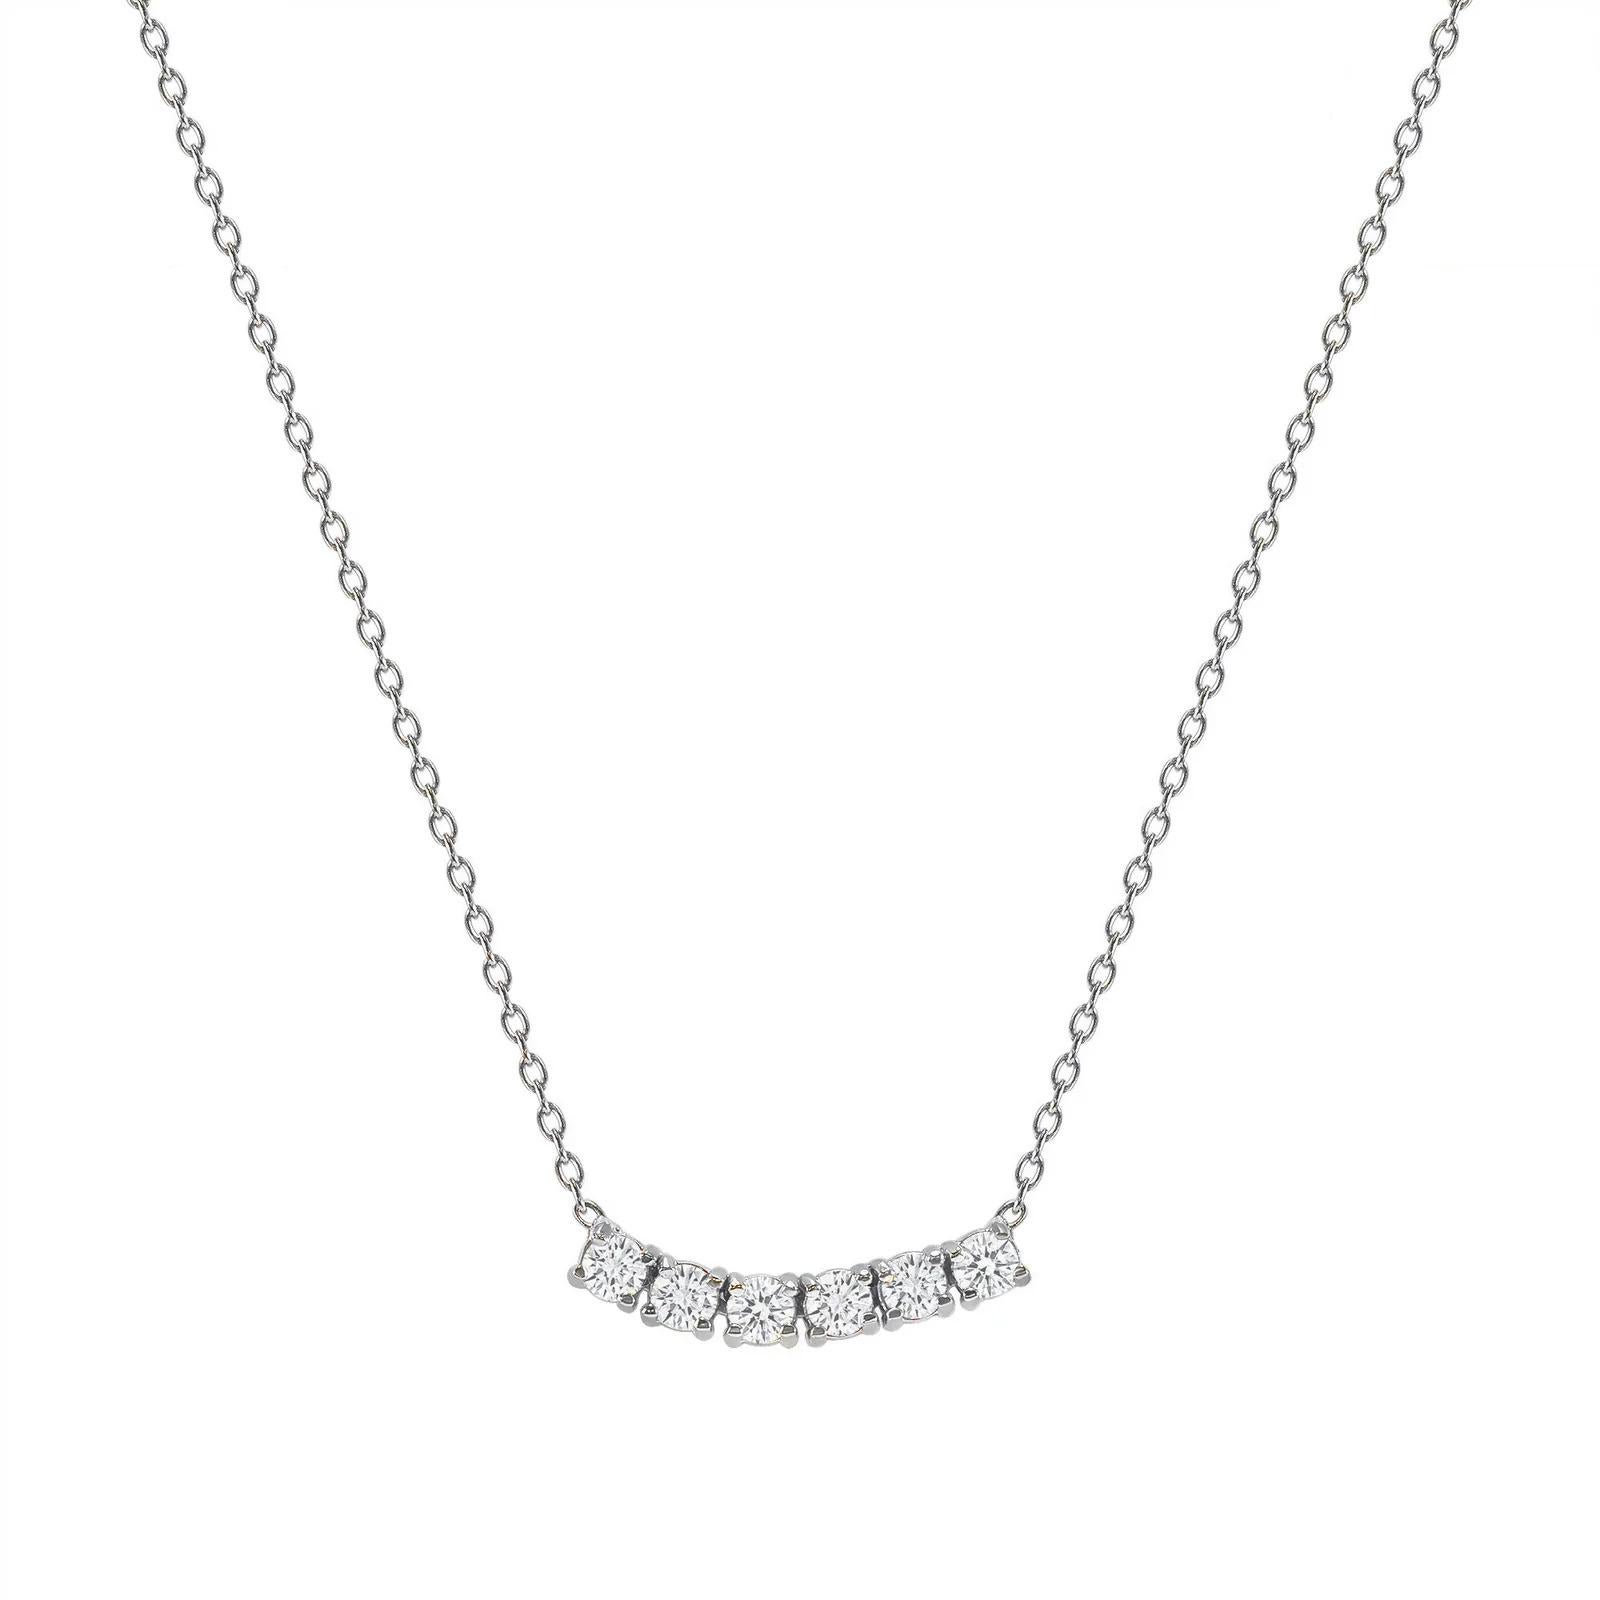 This petite, curved diamond necklace is crafted with gorgeous 14k gold set with six round diamonds.  

Gold: 14k 
Diamond Total Carats: 1.5 ct
Diamond Cut: Round (6 diamonds)
Diamond Clarity: VS
Diamond Color: F
Color: White Gold
Necklace Length: 16